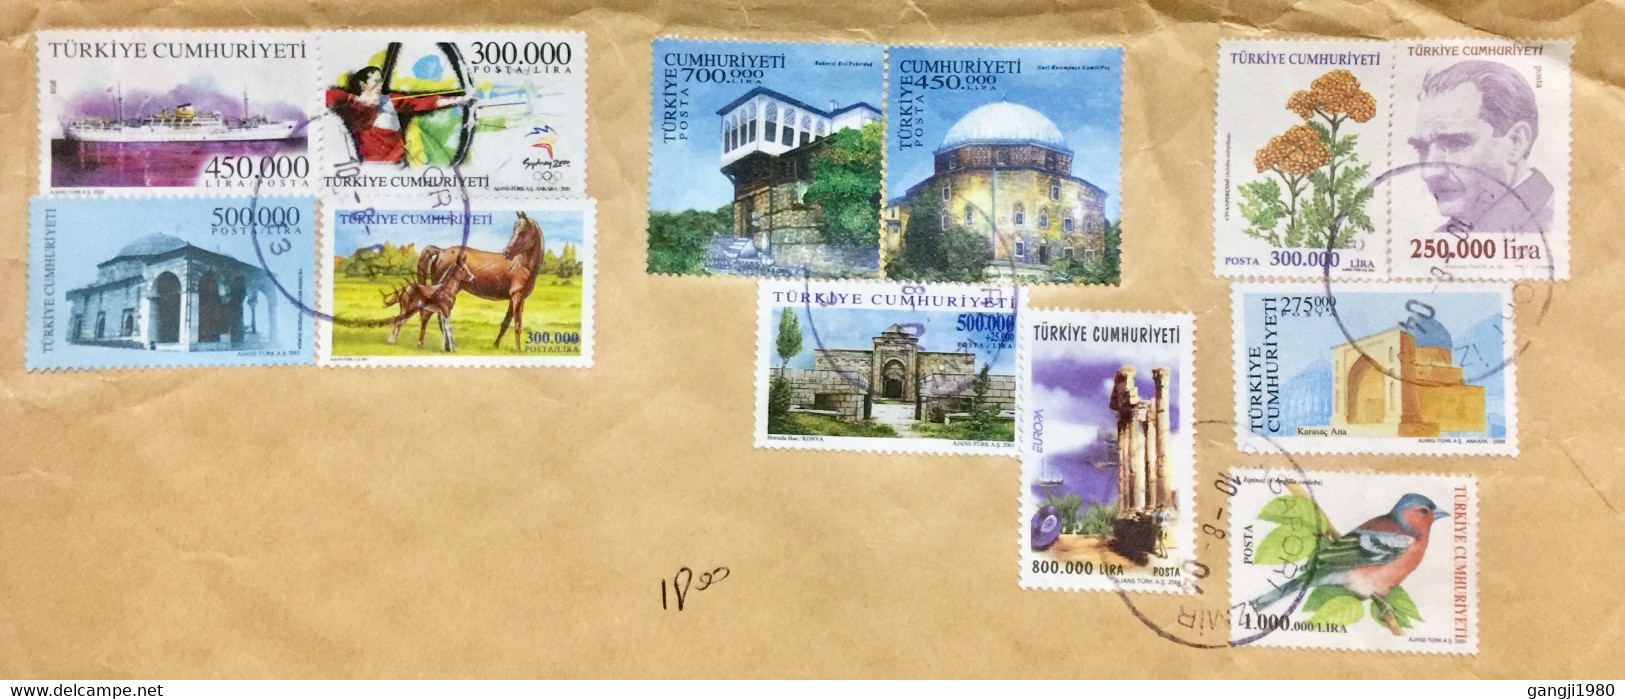 TURKEY 2004, REGISTERED AIRMAIL,ASAPOR TO INDIA 12 STAMPS USED COVER,BIRD,HORSE,ARCHING ,SHIP,MOSQUE FLOWER,ARCHITECTUR, - 1934-39 Sandjak D'Alexandrette & Hatay